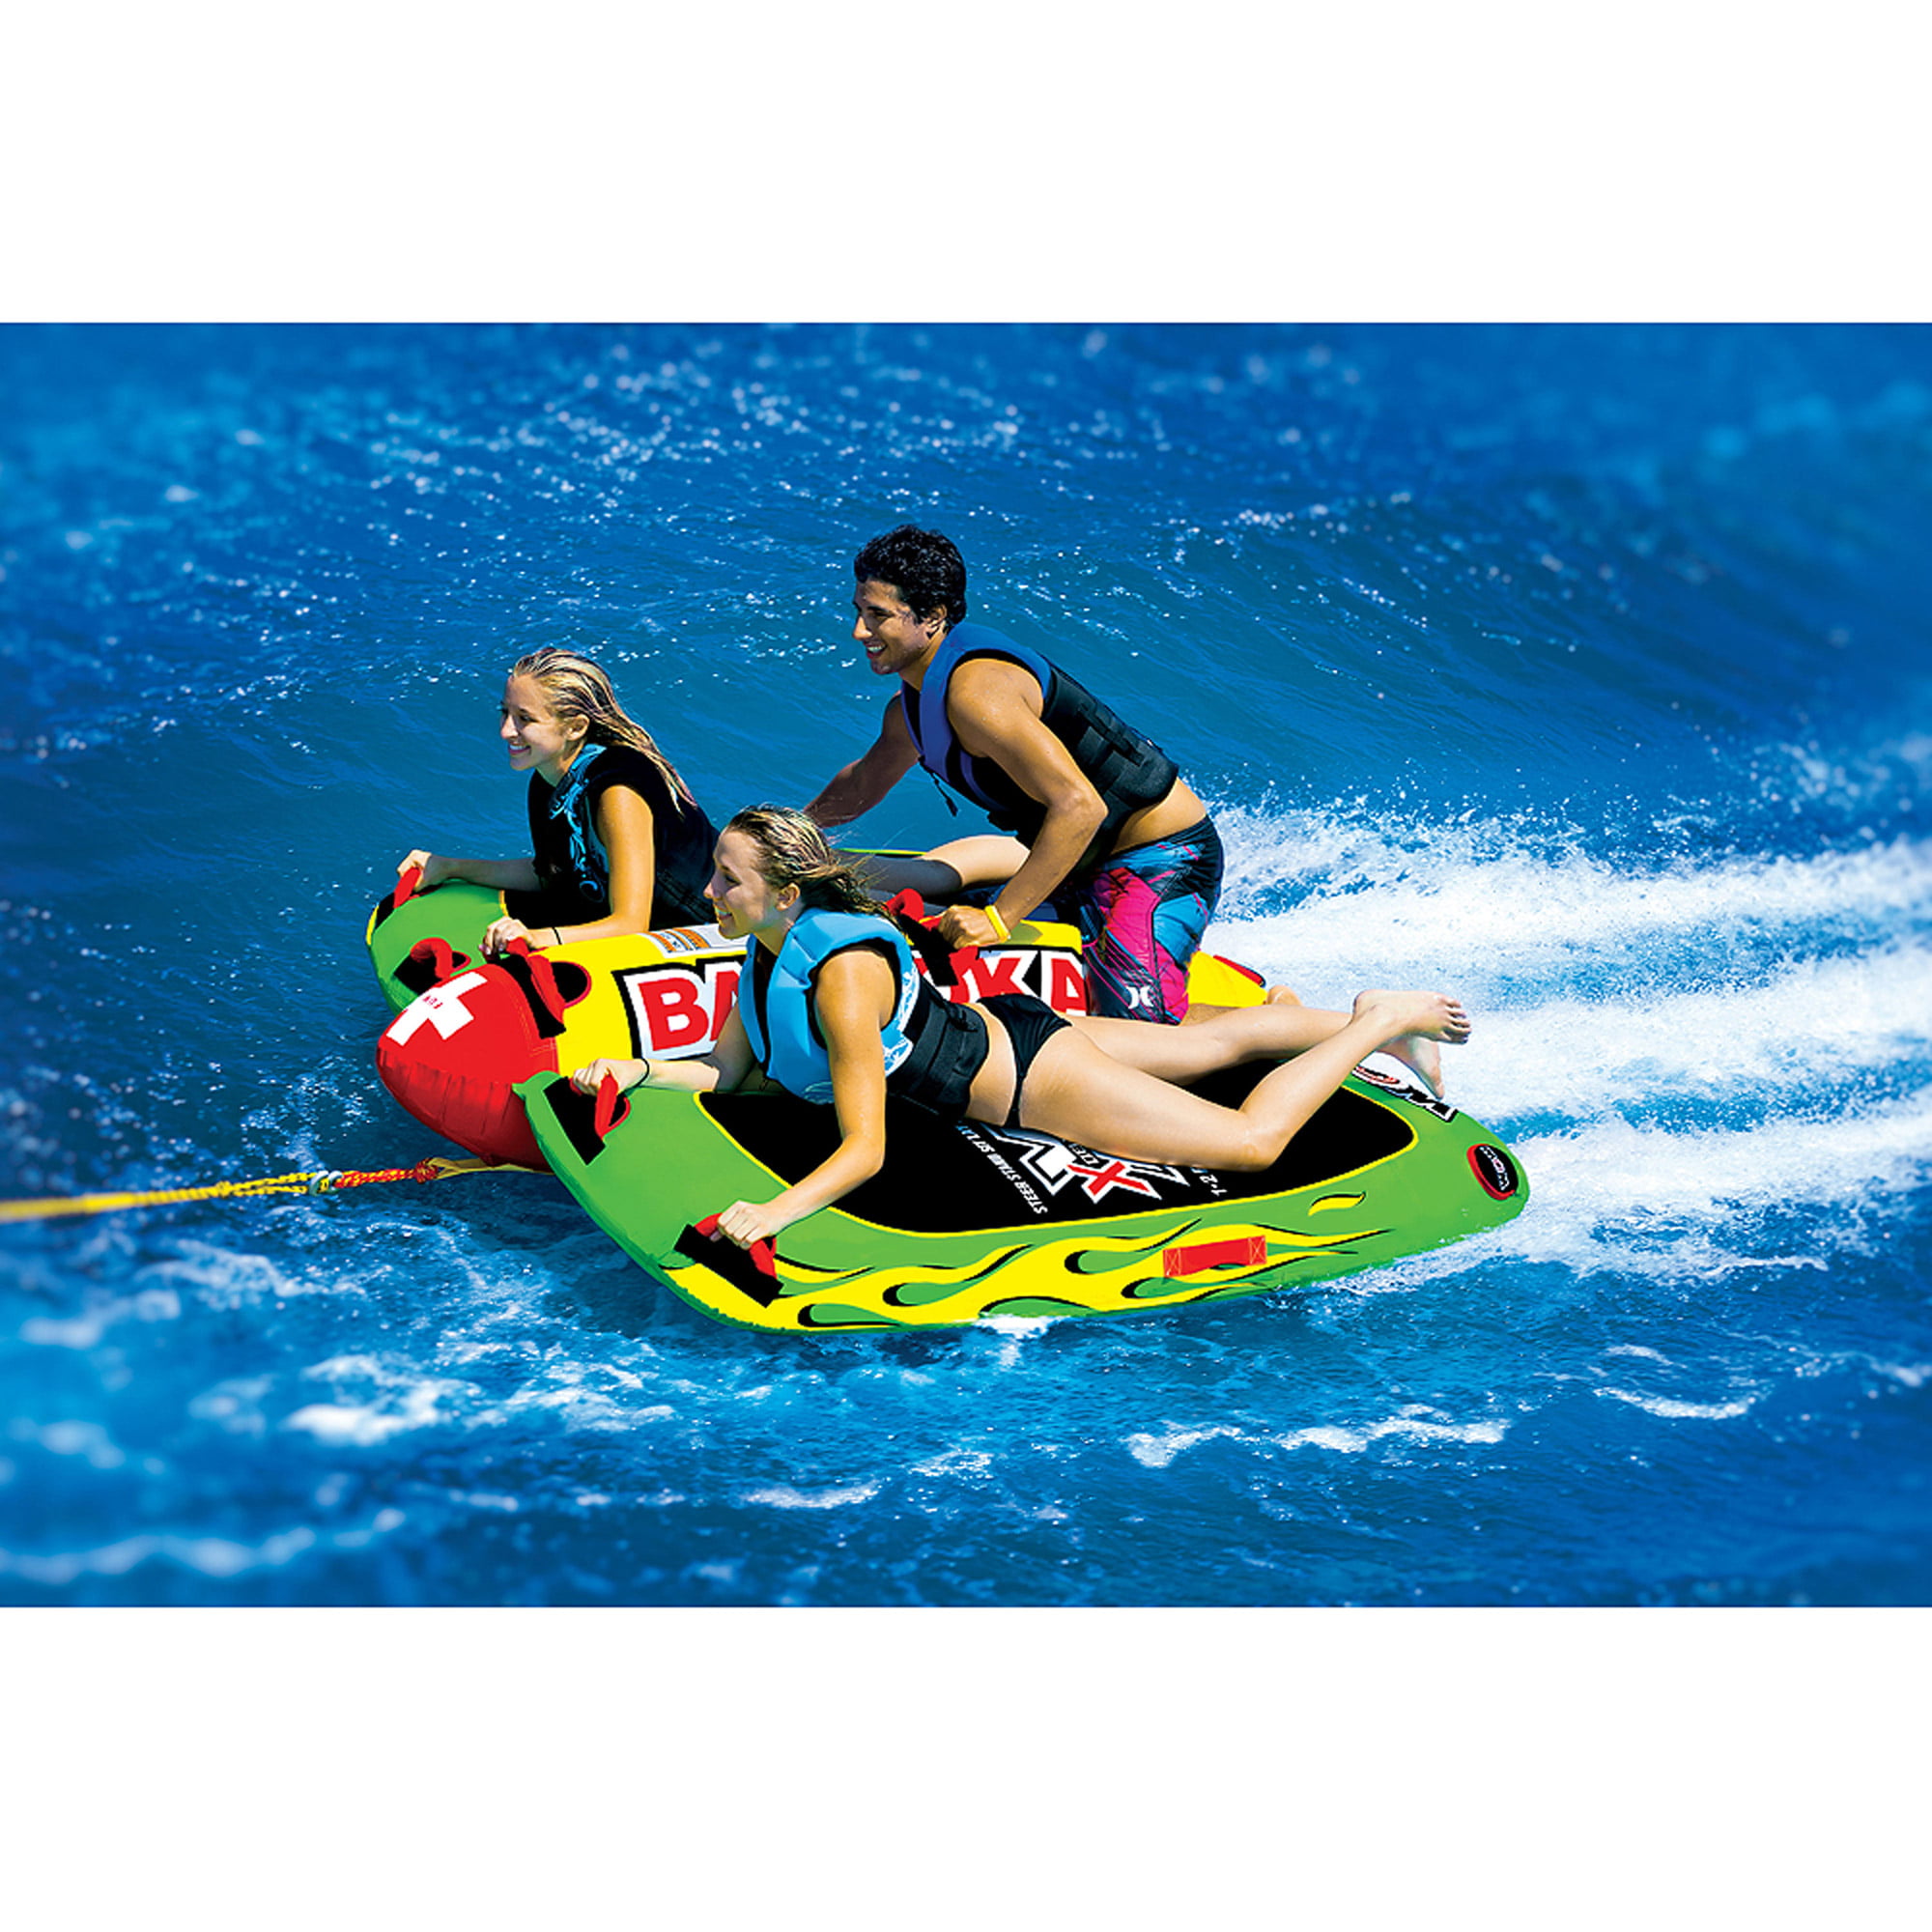 1 to 2 Person Towable WoW Watersports Steerable 19-1090 Take Control of the Ride 